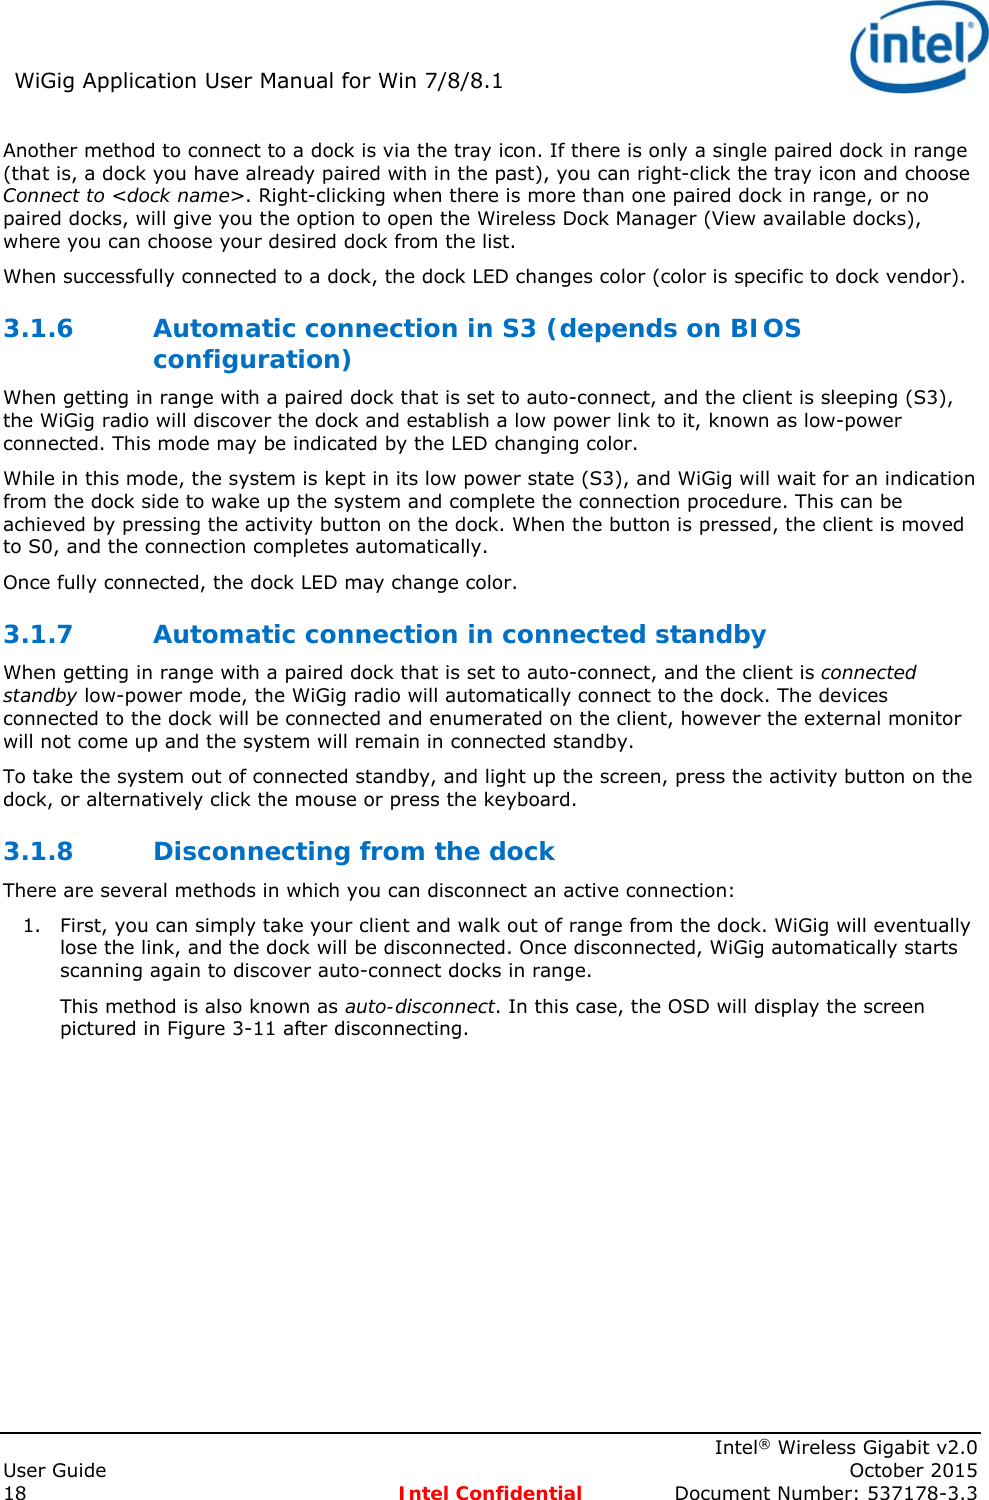 WiGig Application User Manual for Win 7/8/8.1      Intel® Wireless Gigabit v2.0 User Guide    October 2015 18 Intel Confidential  Document Number: 537178-3.3 Another method to connect to a dock is via the tray icon. If there is only a single paired dock in range (that is, a dock you have already paired with in the past), you can right-click the tray icon and choose Connect to &lt;dock name&gt;. Right-clicking when there is more than one paired dock in range, or no paired docks, will give you the option to open the Wireless Dock Manager (View available docks), where you can choose your desired dock from the list. When successfully connected to a dock, the dock LED changes color (color is specific to dock vendor). 3.1.6 Automatic connection in S3 (depends on BIOS configuration) When getting in range with a paired dock that is set to auto-connect, and the client is sleeping (S3), the WiGig radio will discover the dock and establish a low power link to it, known as low-power connected. This mode may be indicated by the LED changing color. While in this mode, the system is kept in its low power state (S3), and WiGig will wait for an indication from the dock side to wake up the system and complete the connection procedure. This can be achieved by pressing the activity button on the dock. When the button is pressed, the client is moved to S0, and the connection completes automatically. Once fully connected, the dock LED may change color. 3.1.7 Automatic connection in connected standby When getting in range with a paired dock that is set to auto-connect, and the client is connected standby low-power mode, the WiGig radio will automatically connect to the dock. The devices connected to the dock will be connected and enumerated on the client, however the external monitor will not come up and the system will remain in connected standby. To take the system out of connected standby, and light up the screen, press the activity button on the dock, or alternatively click the mouse or press the keyboard. 3.1.8 Disconnecting from the dock There are several methods in which you can disconnect an active connection: 1. First, you can simply take your client and walk out of range from the dock. WiGig will eventually lose the link, and the dock will be disconnected. Once disconnected, WiGig automatically starts scanning again to discover auto-connect docks in range. This method is also known as auto-disconnect. In this case, the OSD will display the screen pictured in Figure 3-11 after disconnecting. 